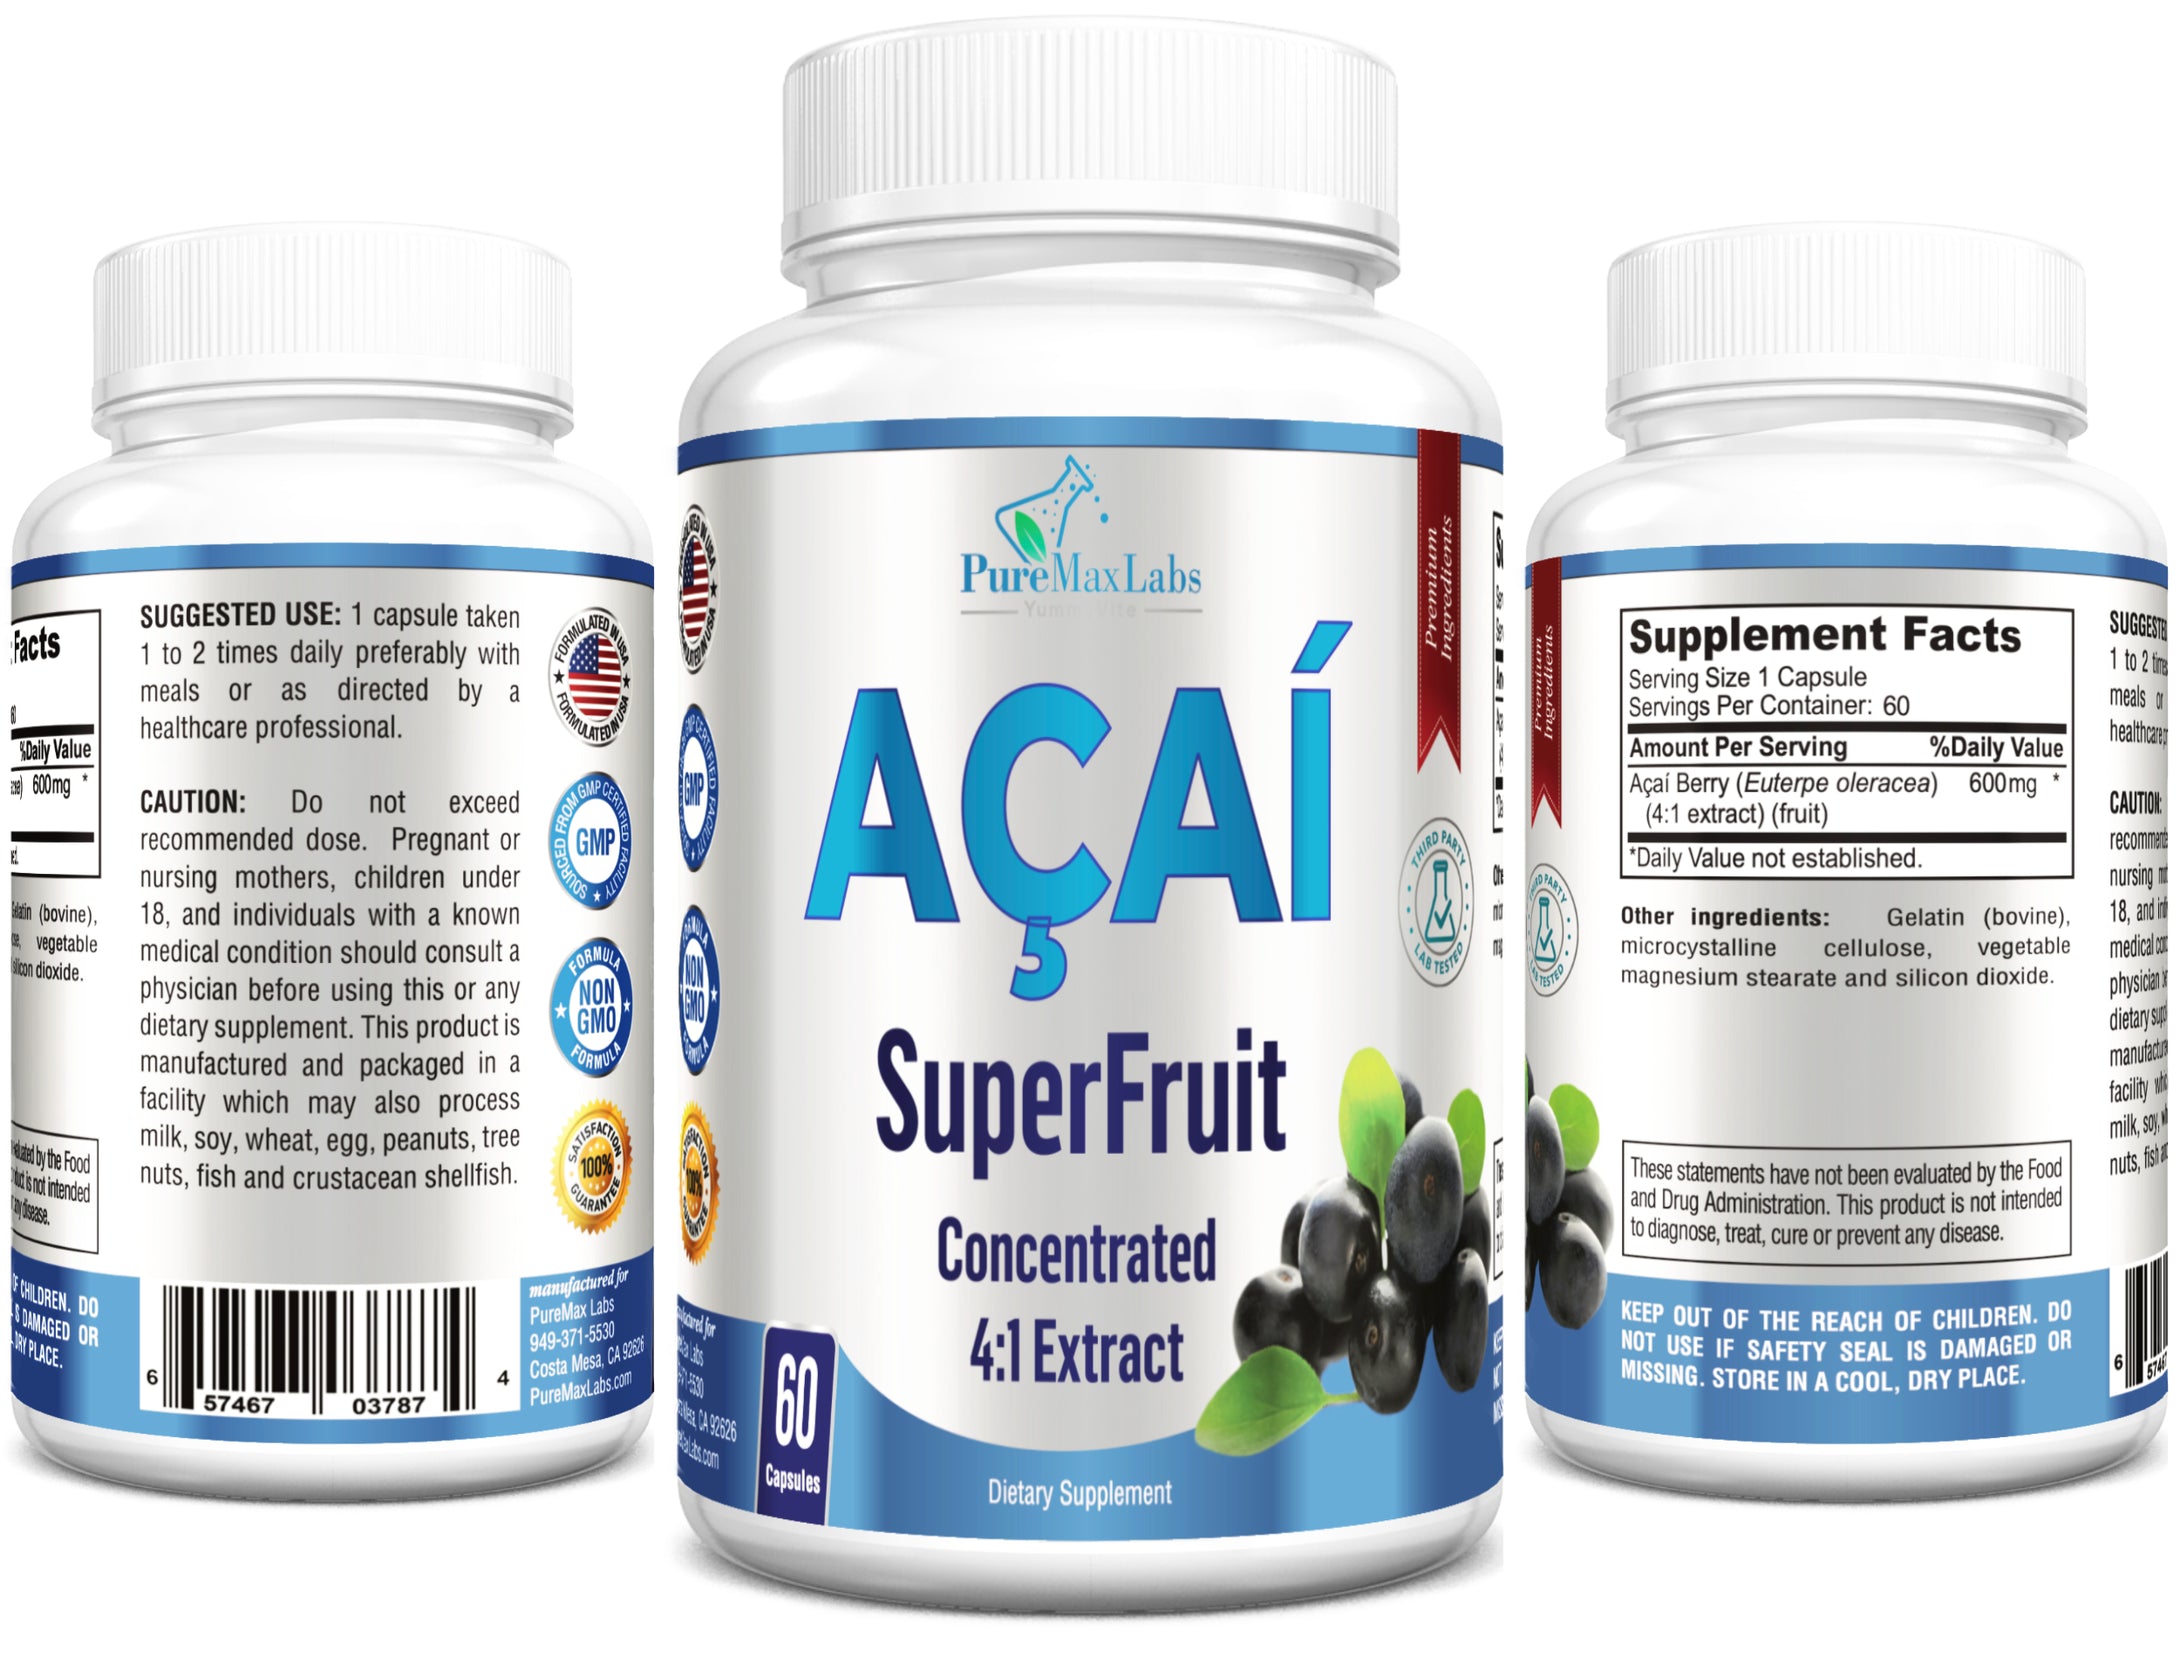 Acai Berry Superfruit - Concentrated 4:1 Extract - Equivalent to 2400mg per Capsule - 60 Capsules